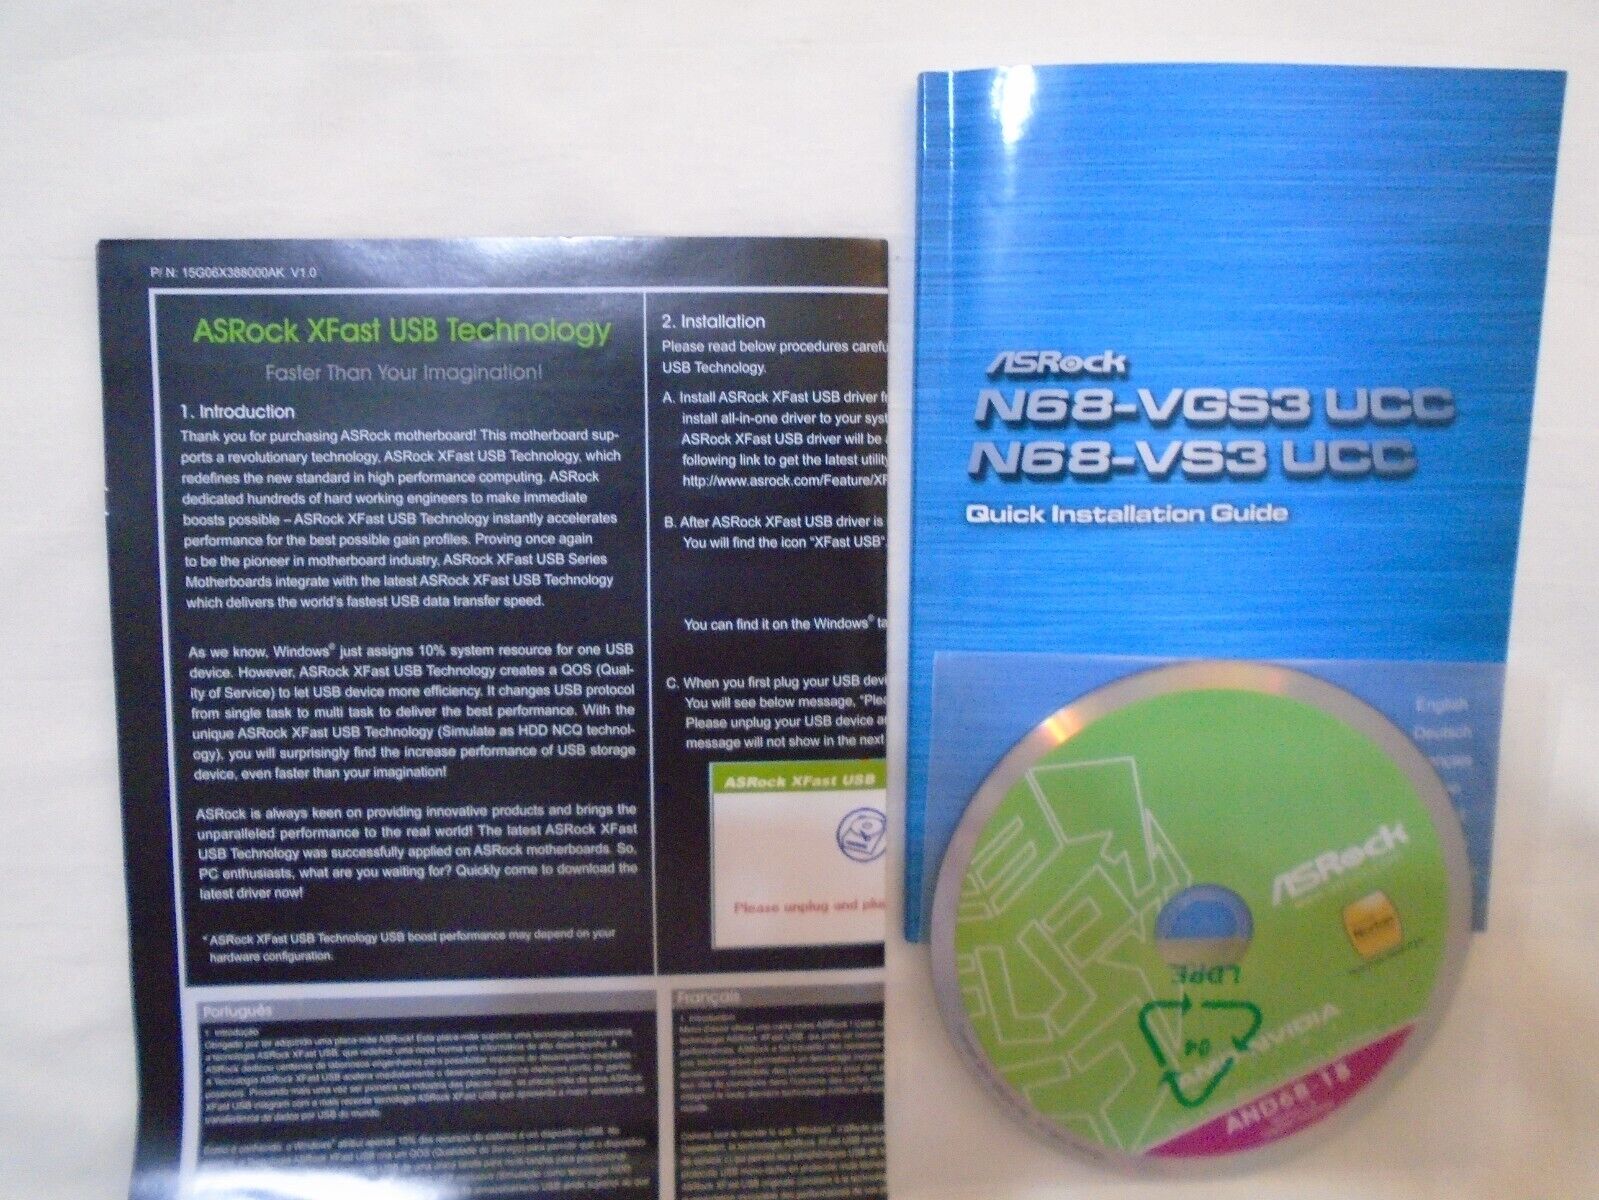 ASRock N68-VGS3 UCC Quick Installation Guide & DVD AS Rock